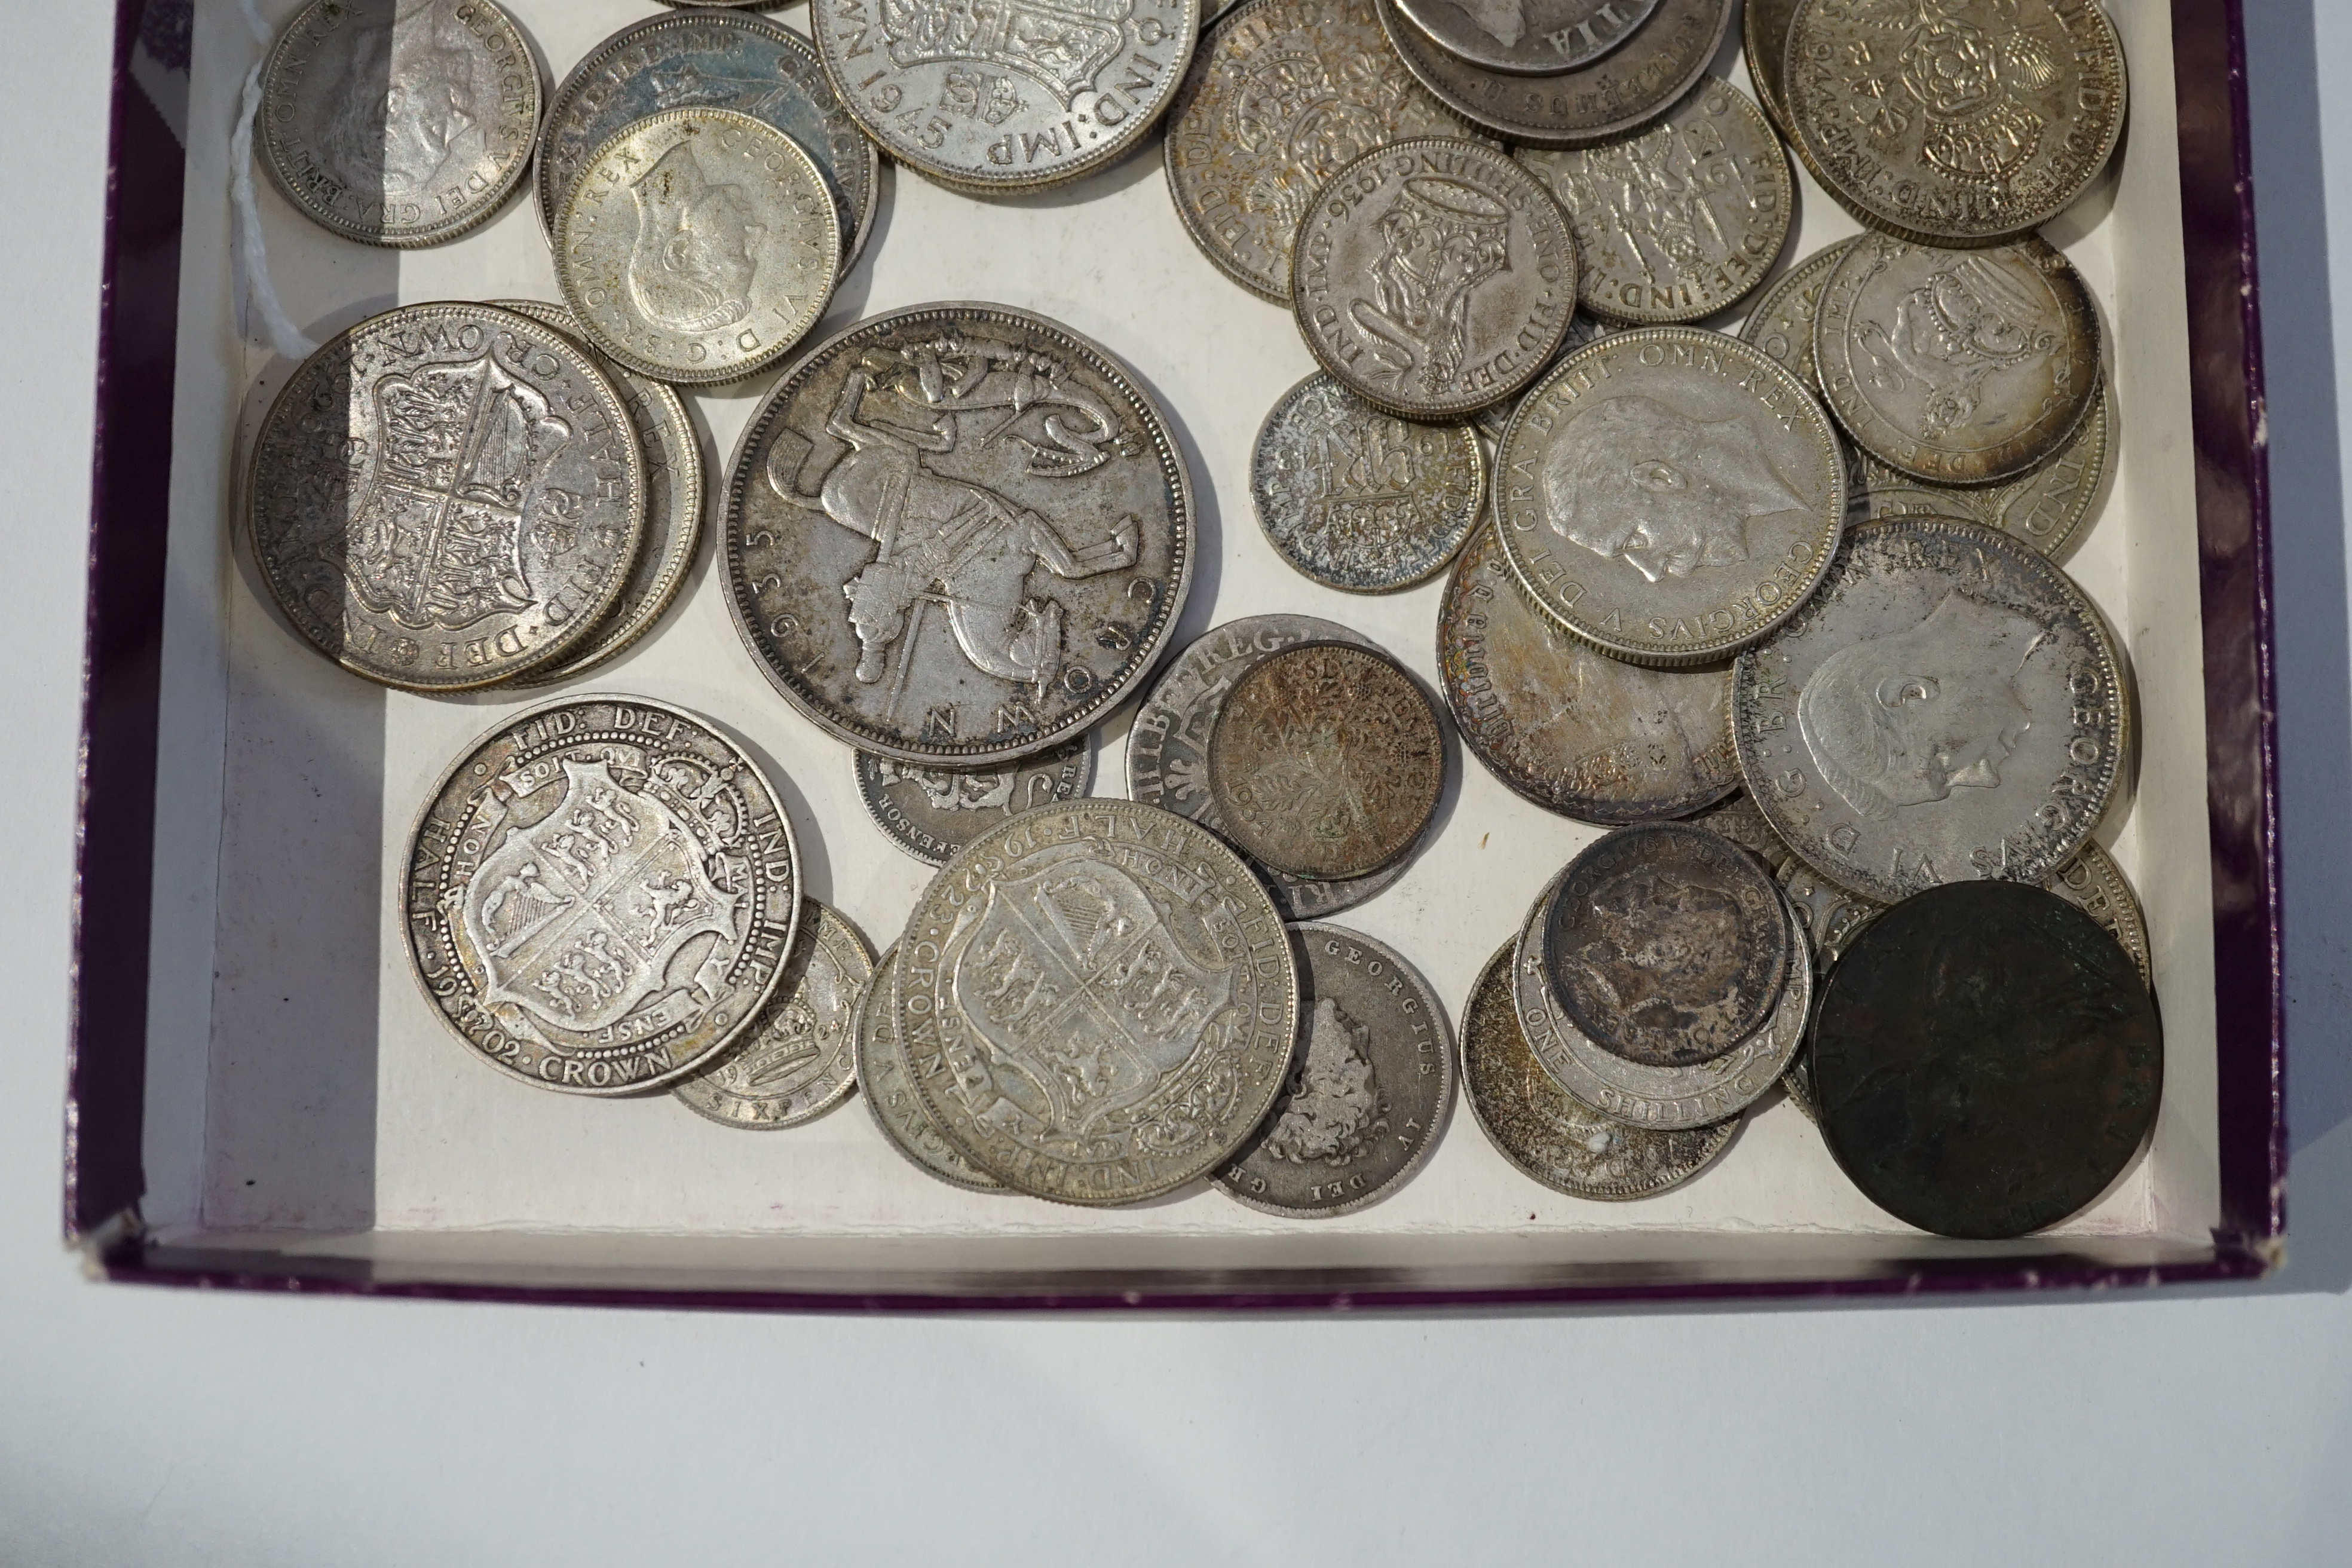 British silver coins, Anne to George VI, highlights include 1935 crown, two Anne shillings, various halfcrowns, florins and shillings and threepence coins, many VF or better, together with a George III 1775 Halfpenny, Ge